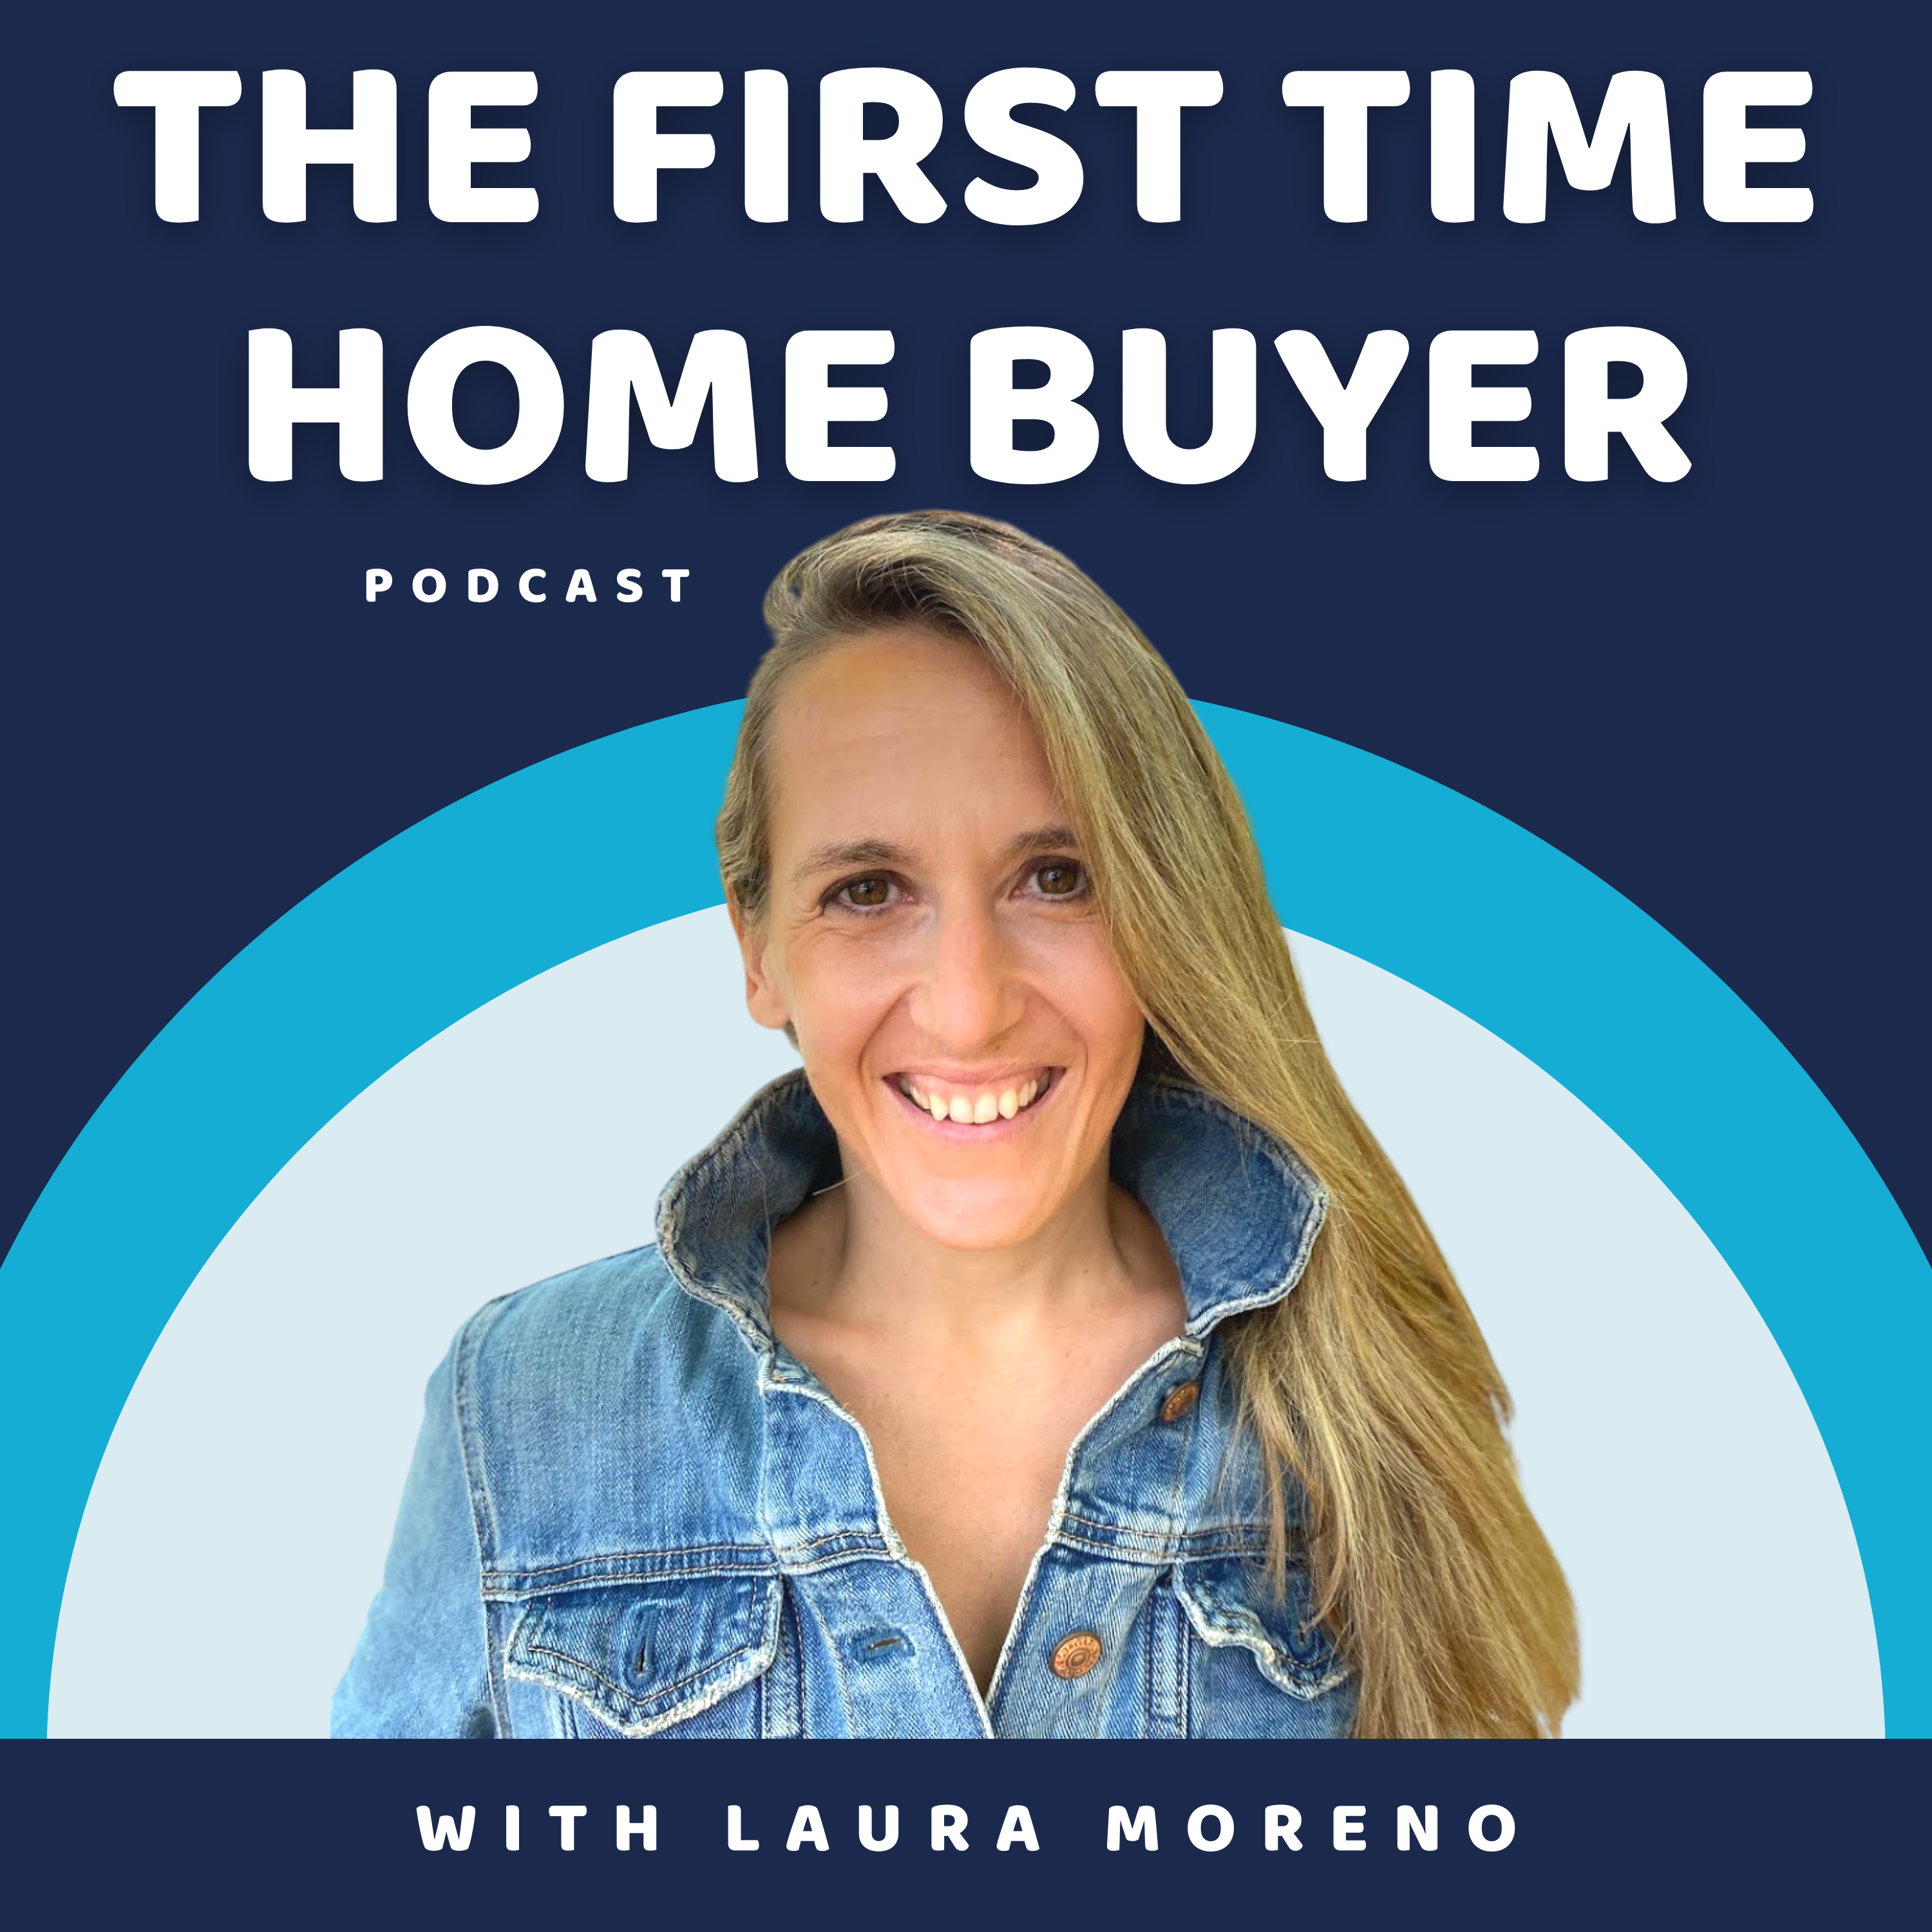 The First Time Home Buyer Podcast - With Laura Moreno